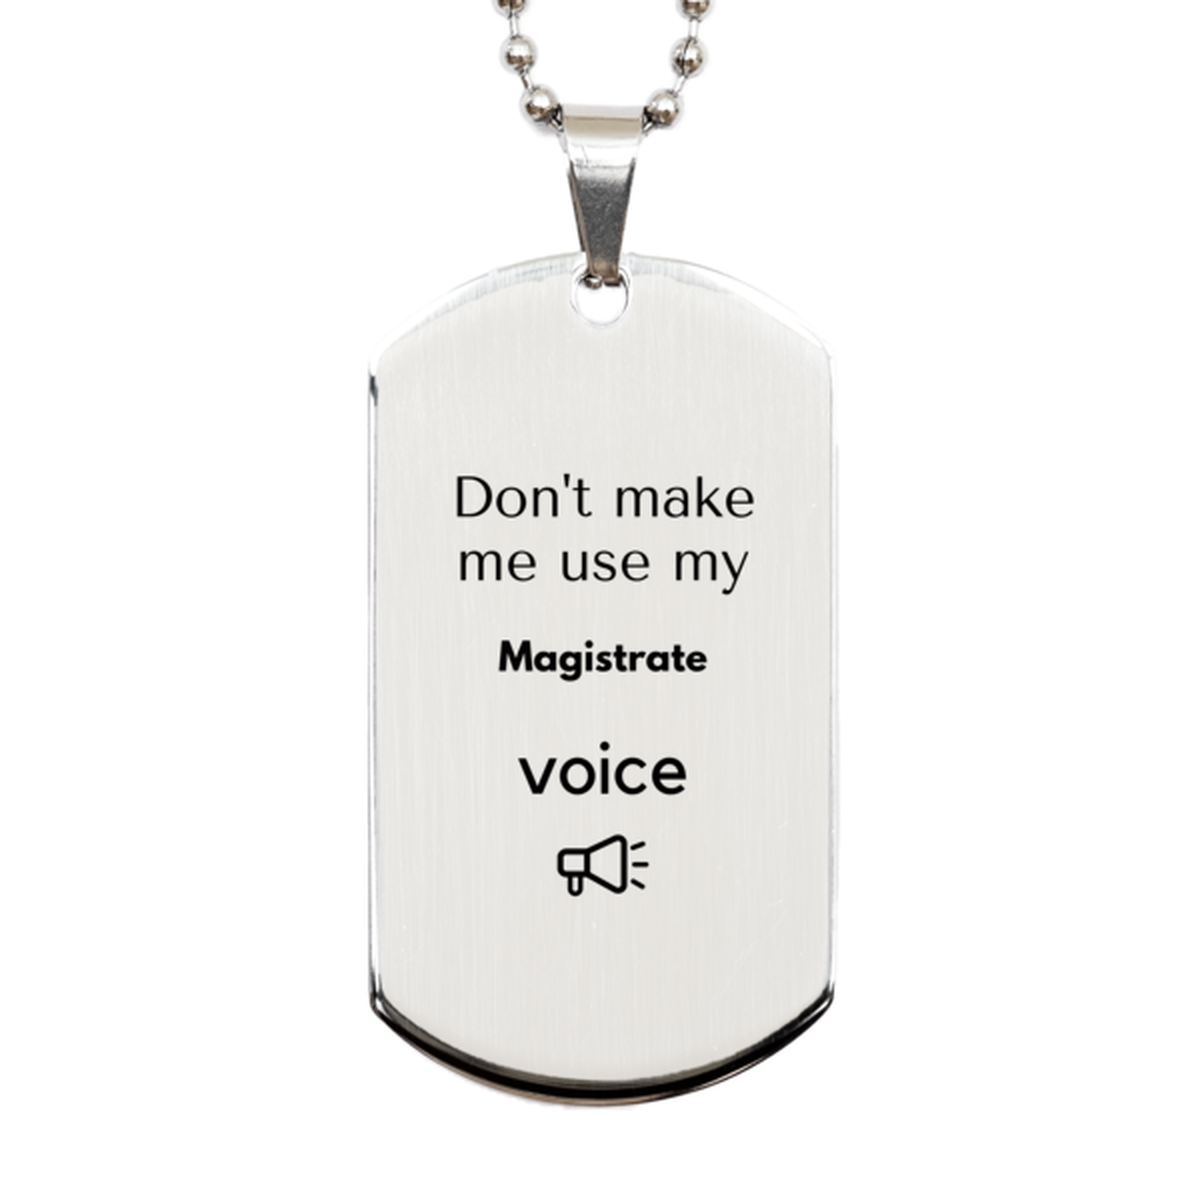 Don't make me use my Magistrate voice, Sarcasm Magistrate Gifts, Christmas Magistrate Silver Dog Tag Birthday Unique Gifts For Magistrate Coworkers, Men, Women, Colleague, Friends